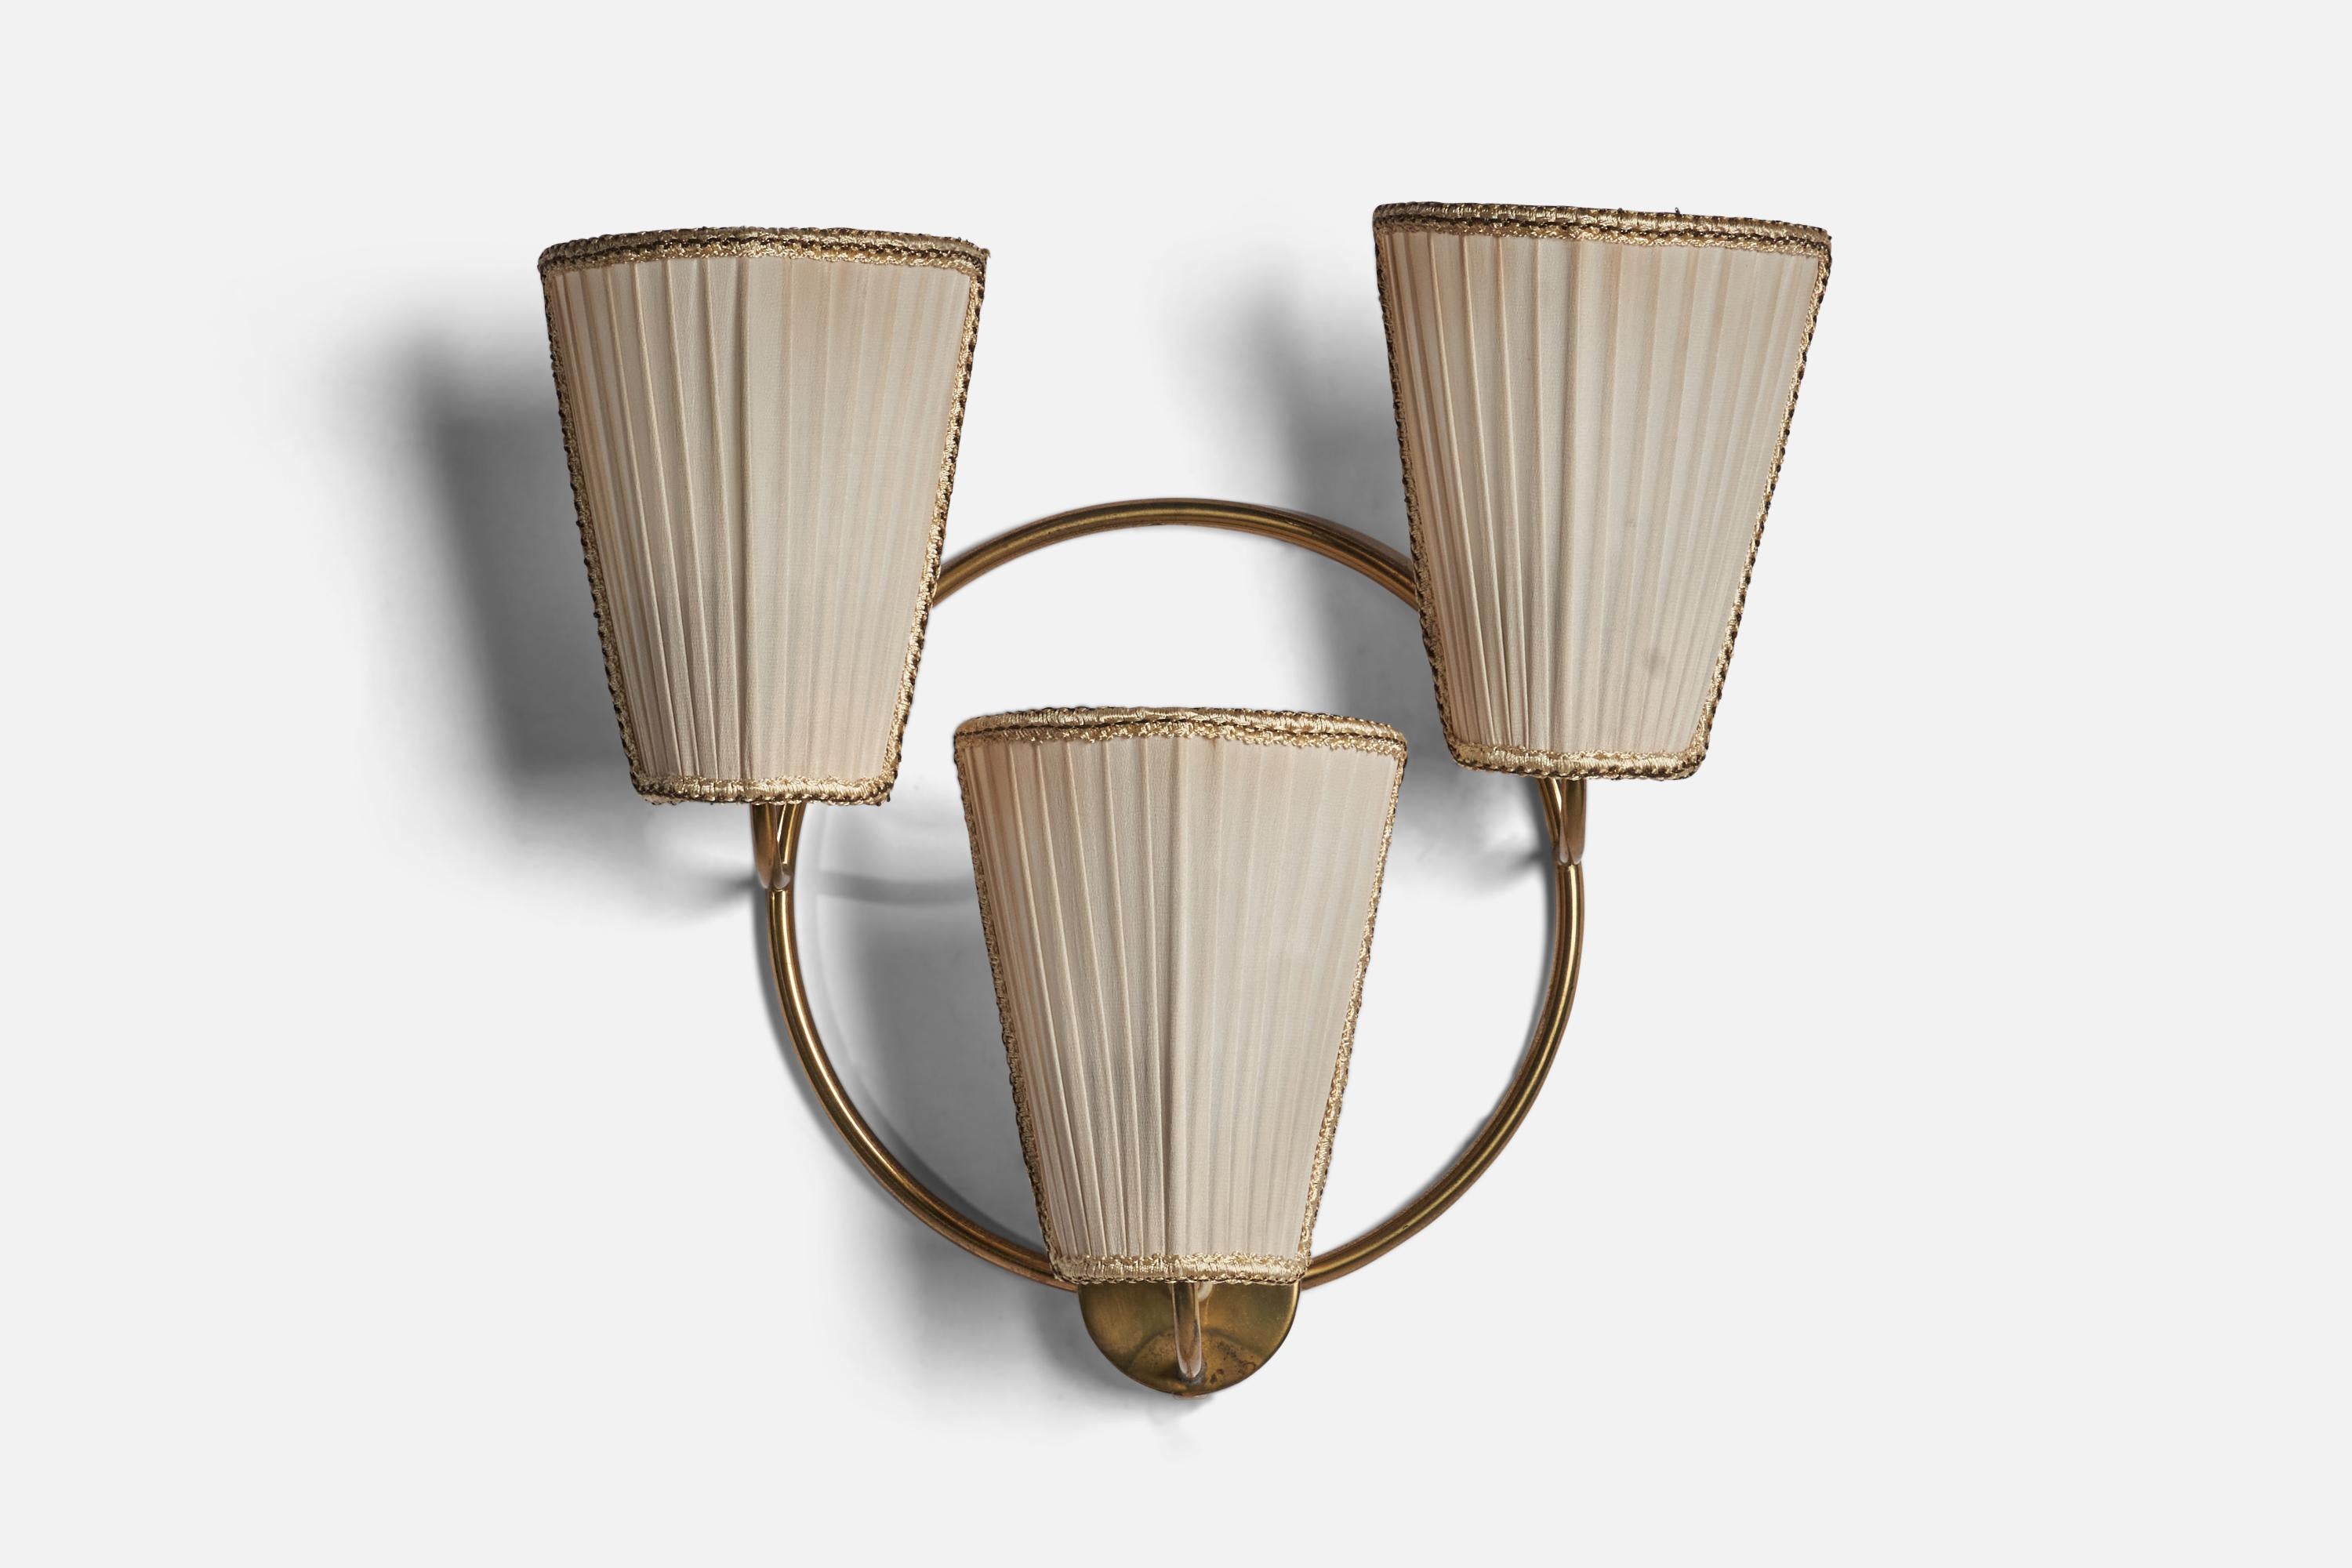 A three-armed brass and off-white fabric wall light designed and produced in Sweden, 1940s.

Overall Dimensions (inches): 16” H x 17” W x 5.2”D
Back Plate Dimensions (inches): 3 inch diameter, 1 inch depth
Bulb Specifications: E-26 Bulb
Number of